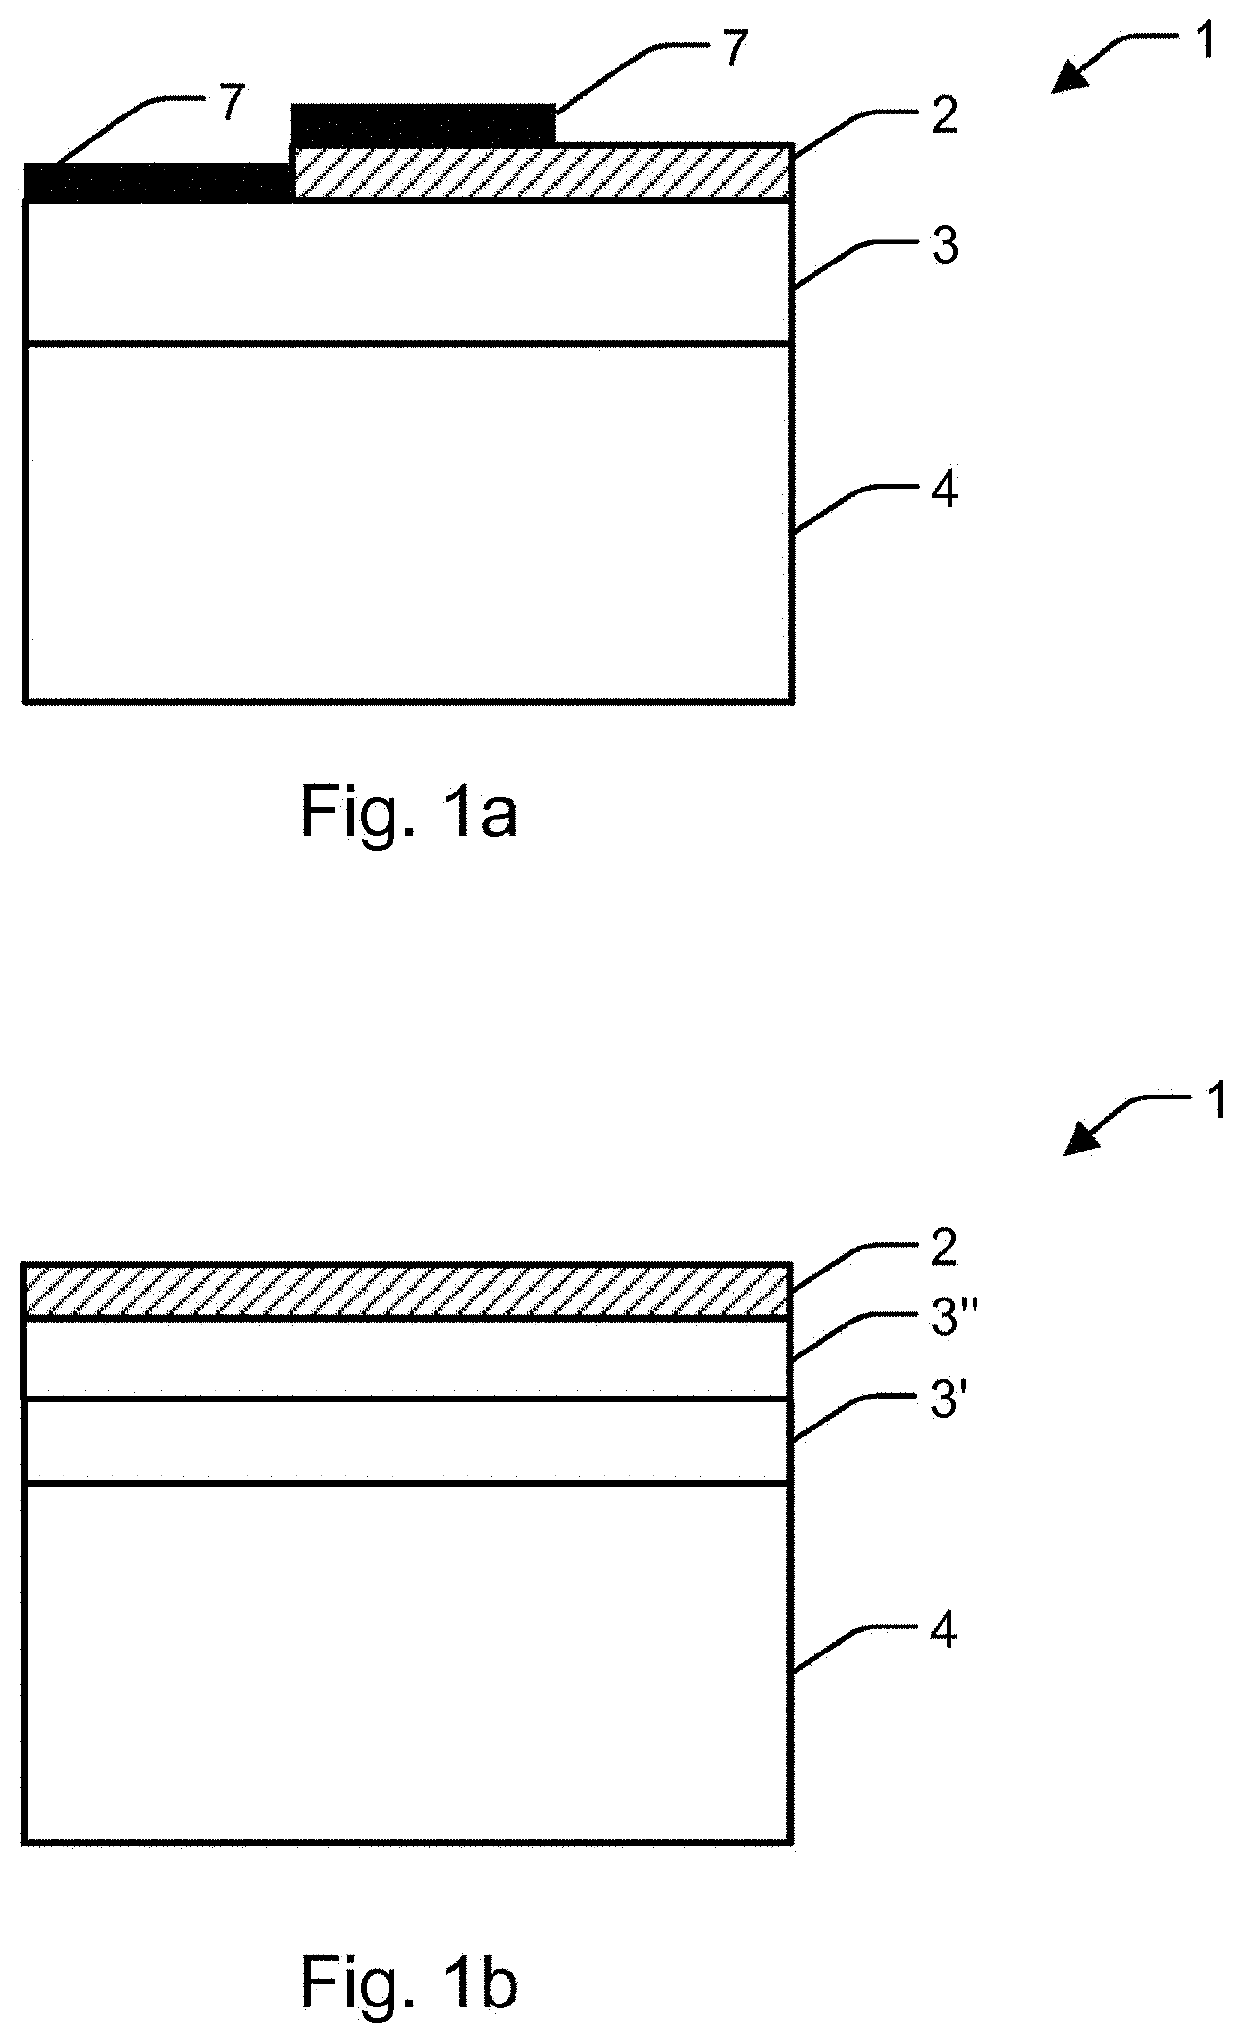 A laminated packaging material for liquid food products, a method for making the same, a method for printing on the same and a package made from the same